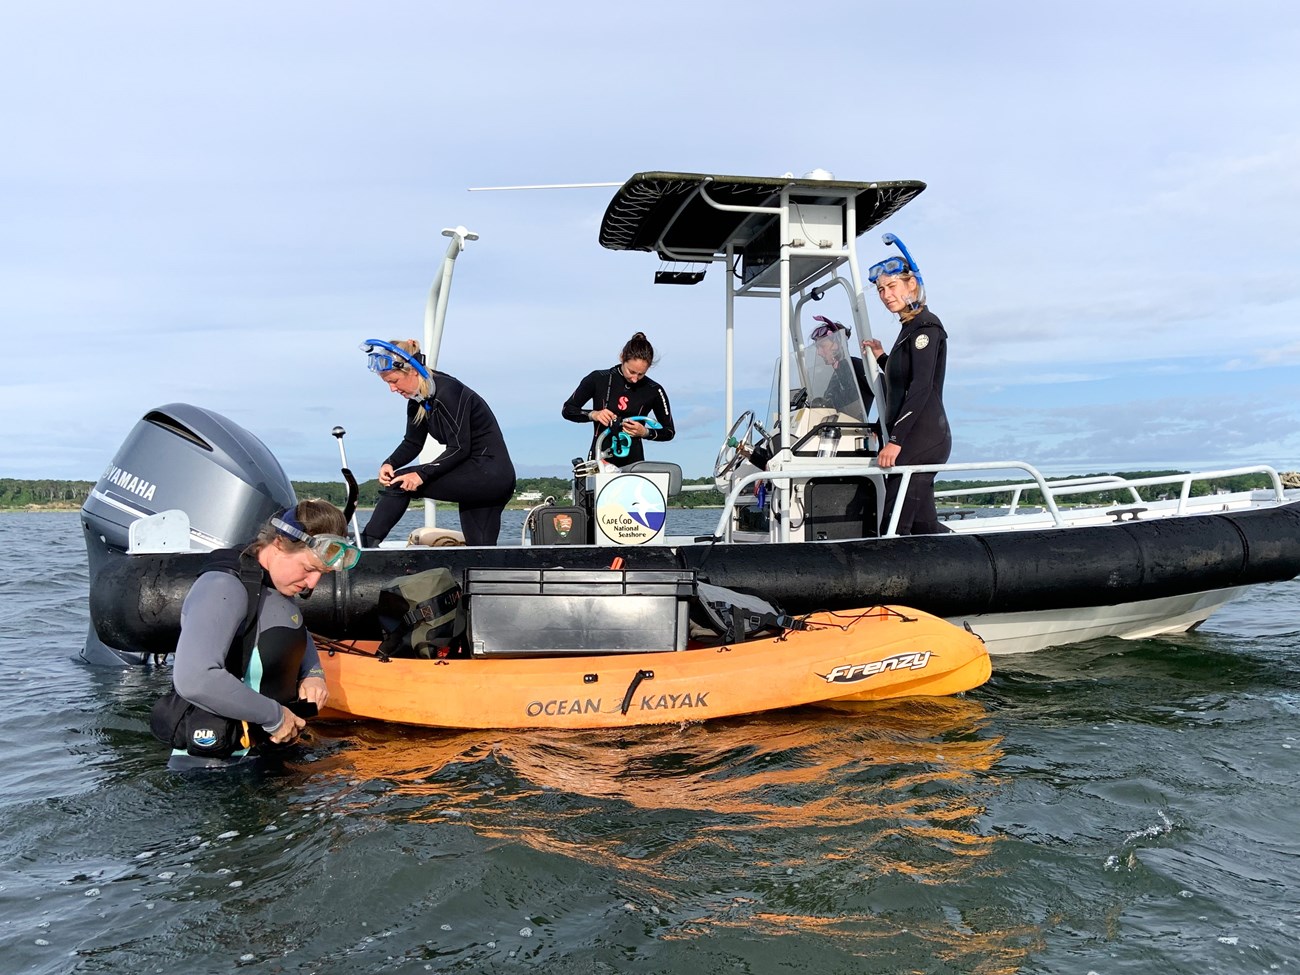 Four field crew members wearing wetsuits and snorkels stand on a boat. One researcher stands waist-deep, next to a yellow raft